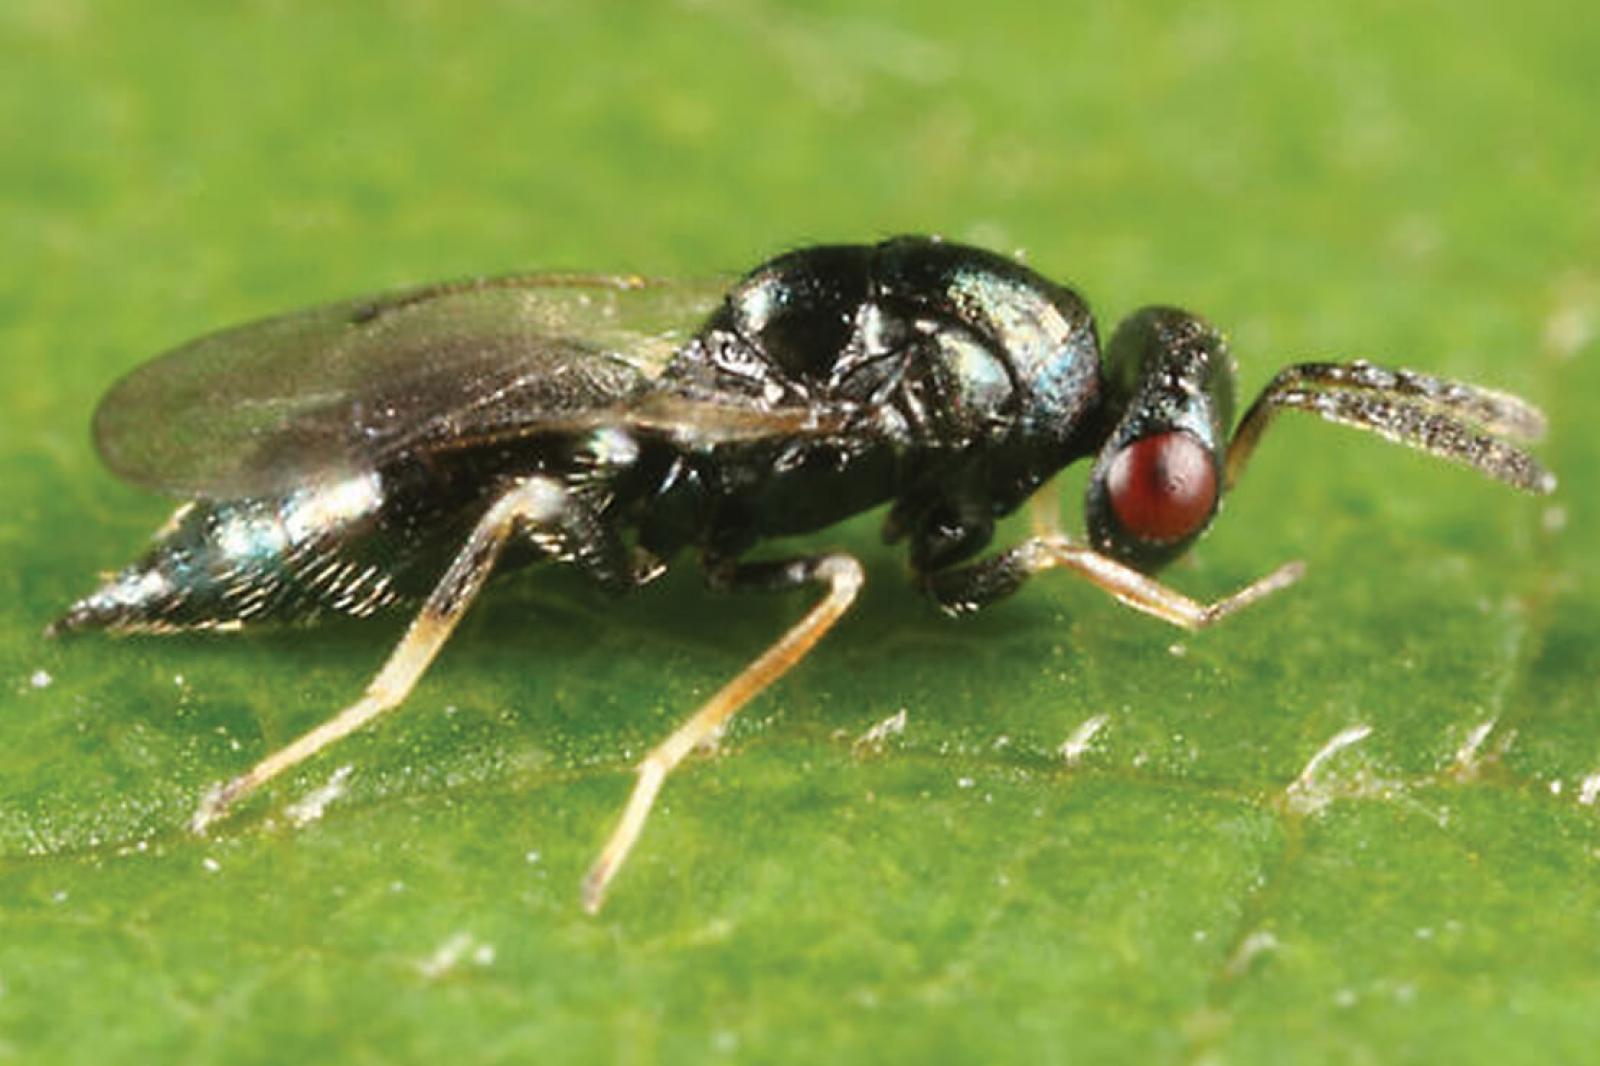 Tetrastichus planipennisi, a natural enemy of emerald ash borer, offers hope as a management tool.